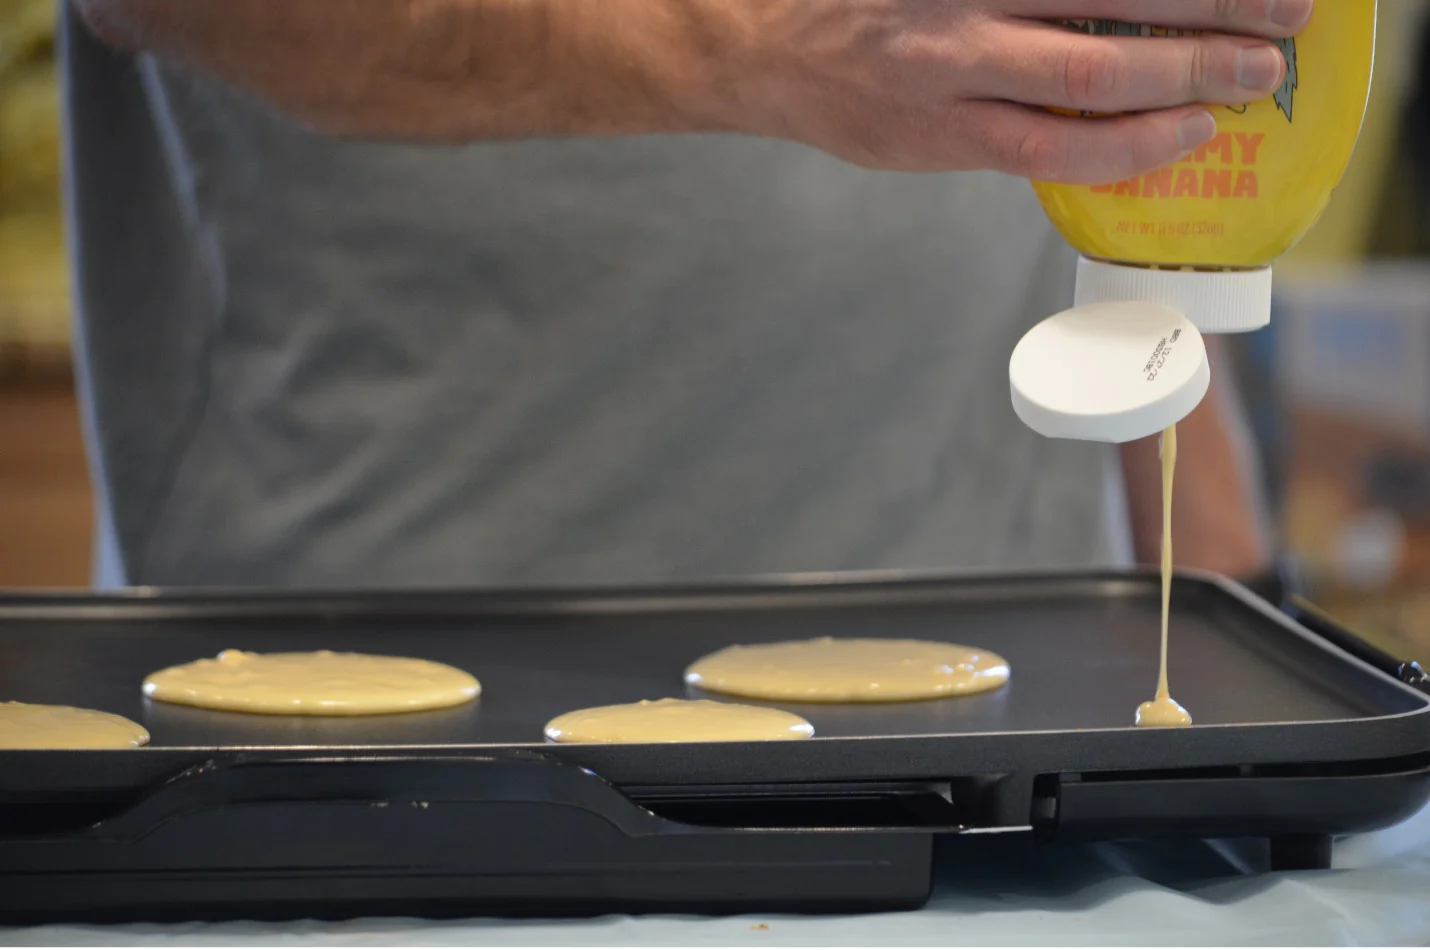 squeezable pancake batter for camping